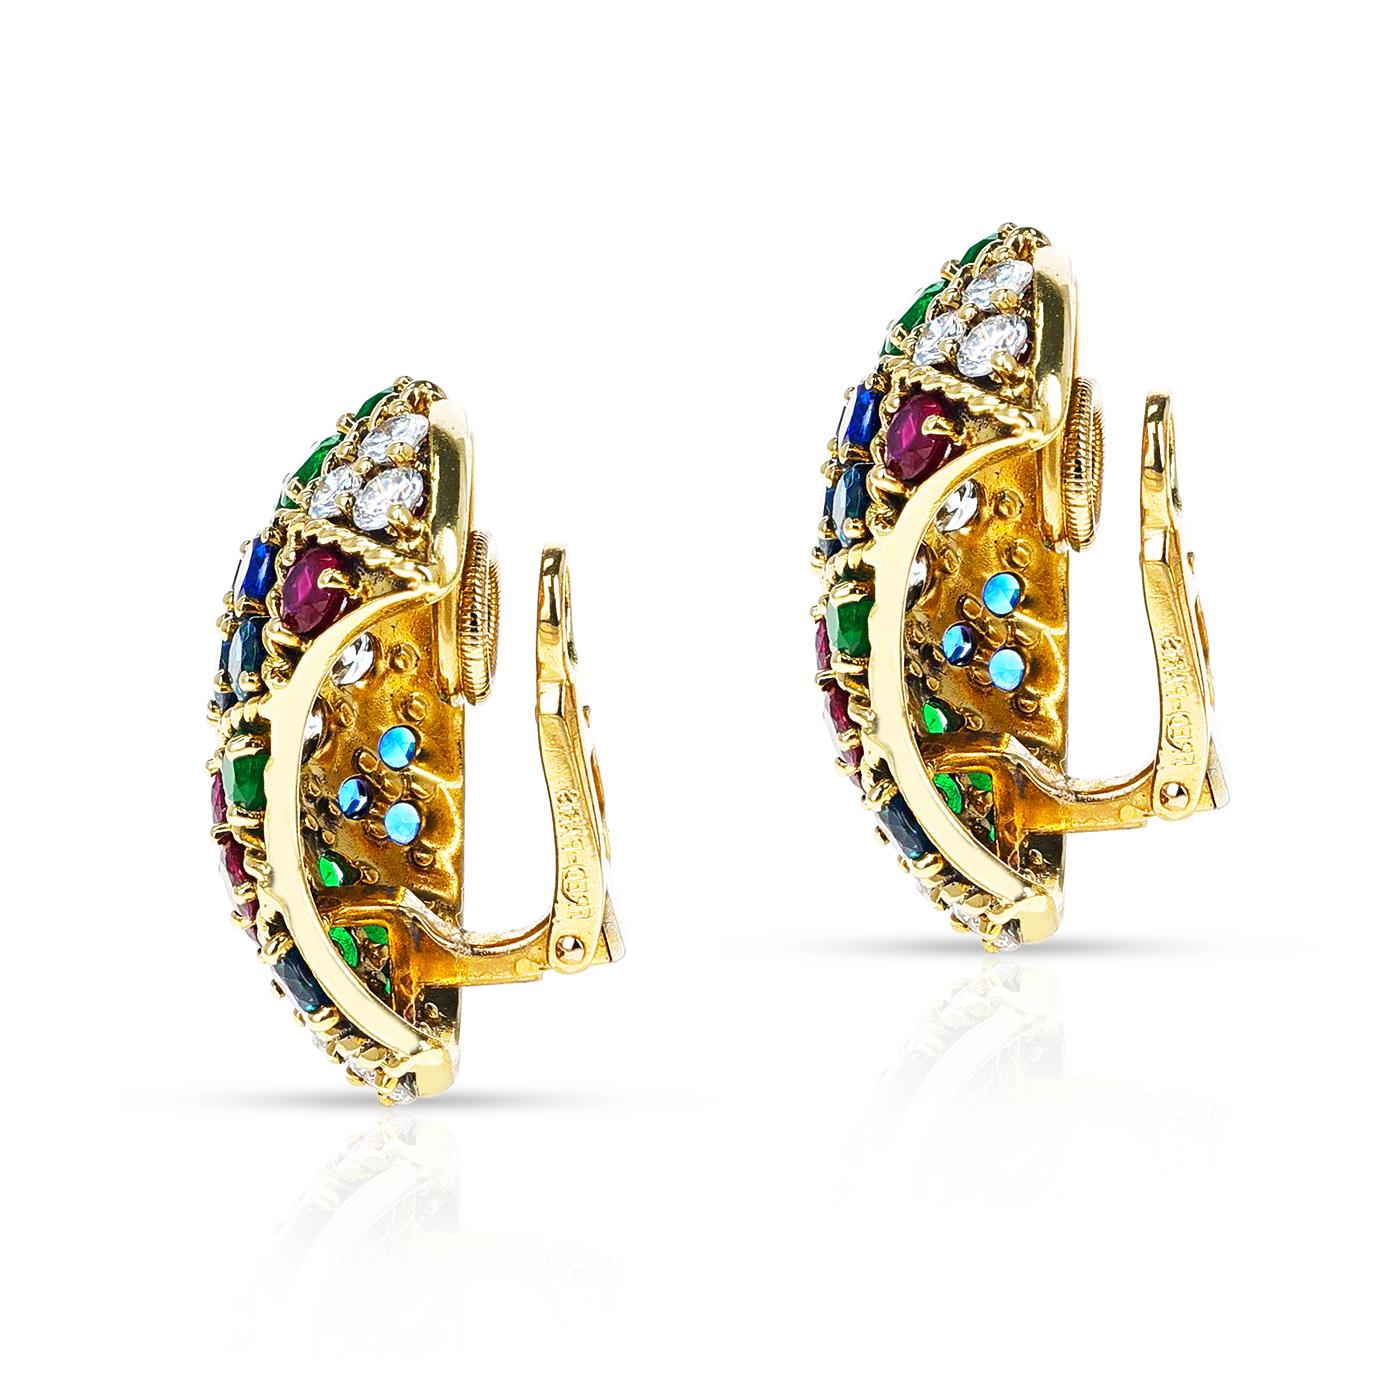 Fred Paris Ruby, Emerald, Sapphire and Diamond Bangle and Earring Set, 18k For Sale 5